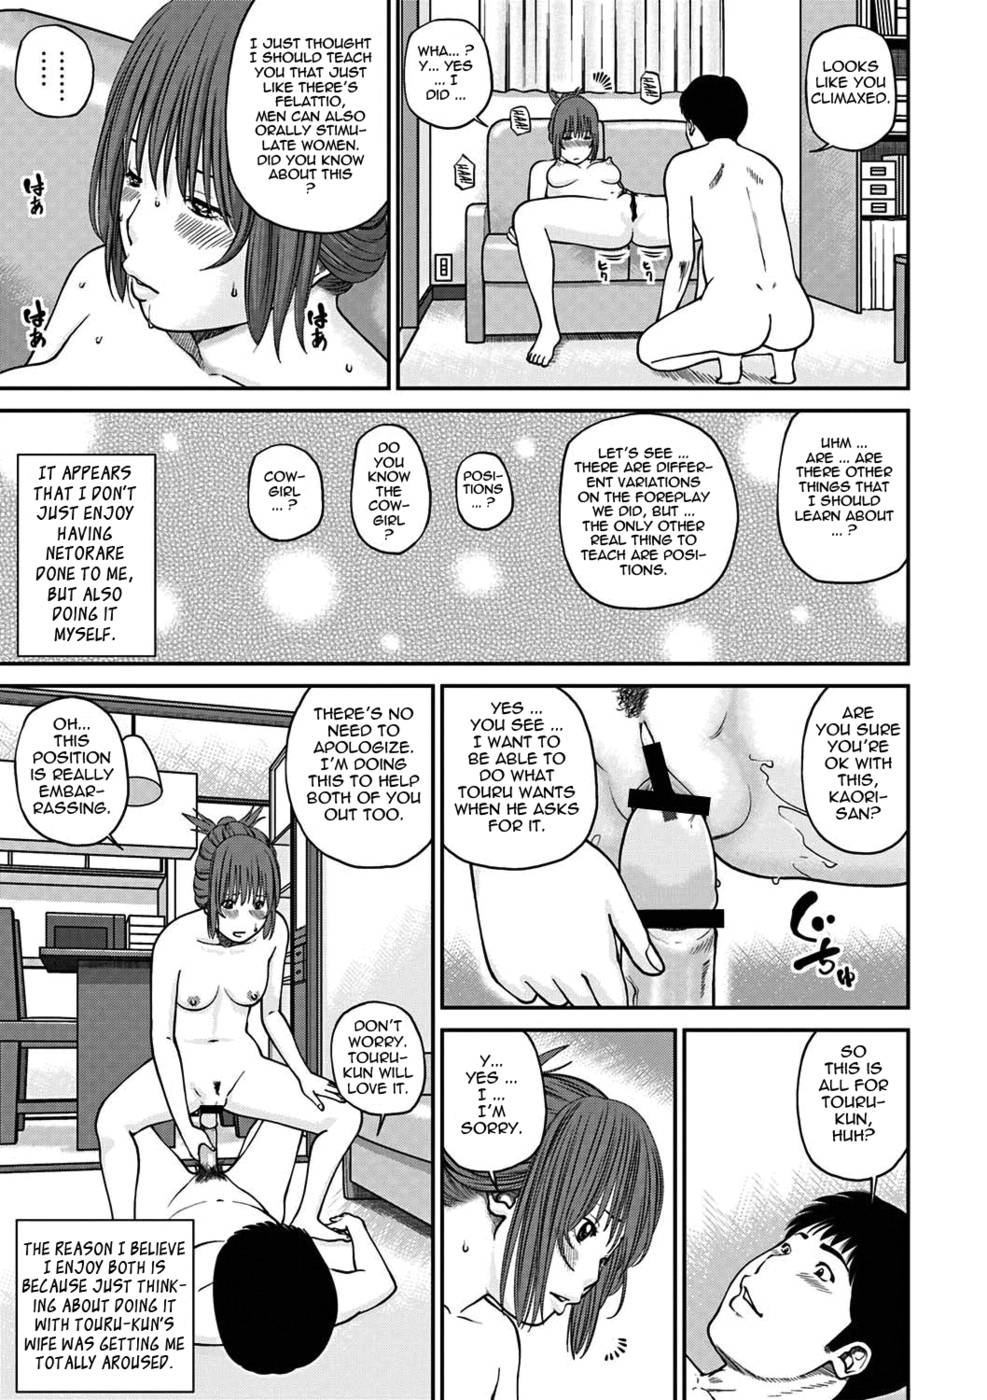 33 Year Old Unsatisfied Wife-Chapter 3-Spouse Swapping-Second Day-Hentai Manga Hentai Comic